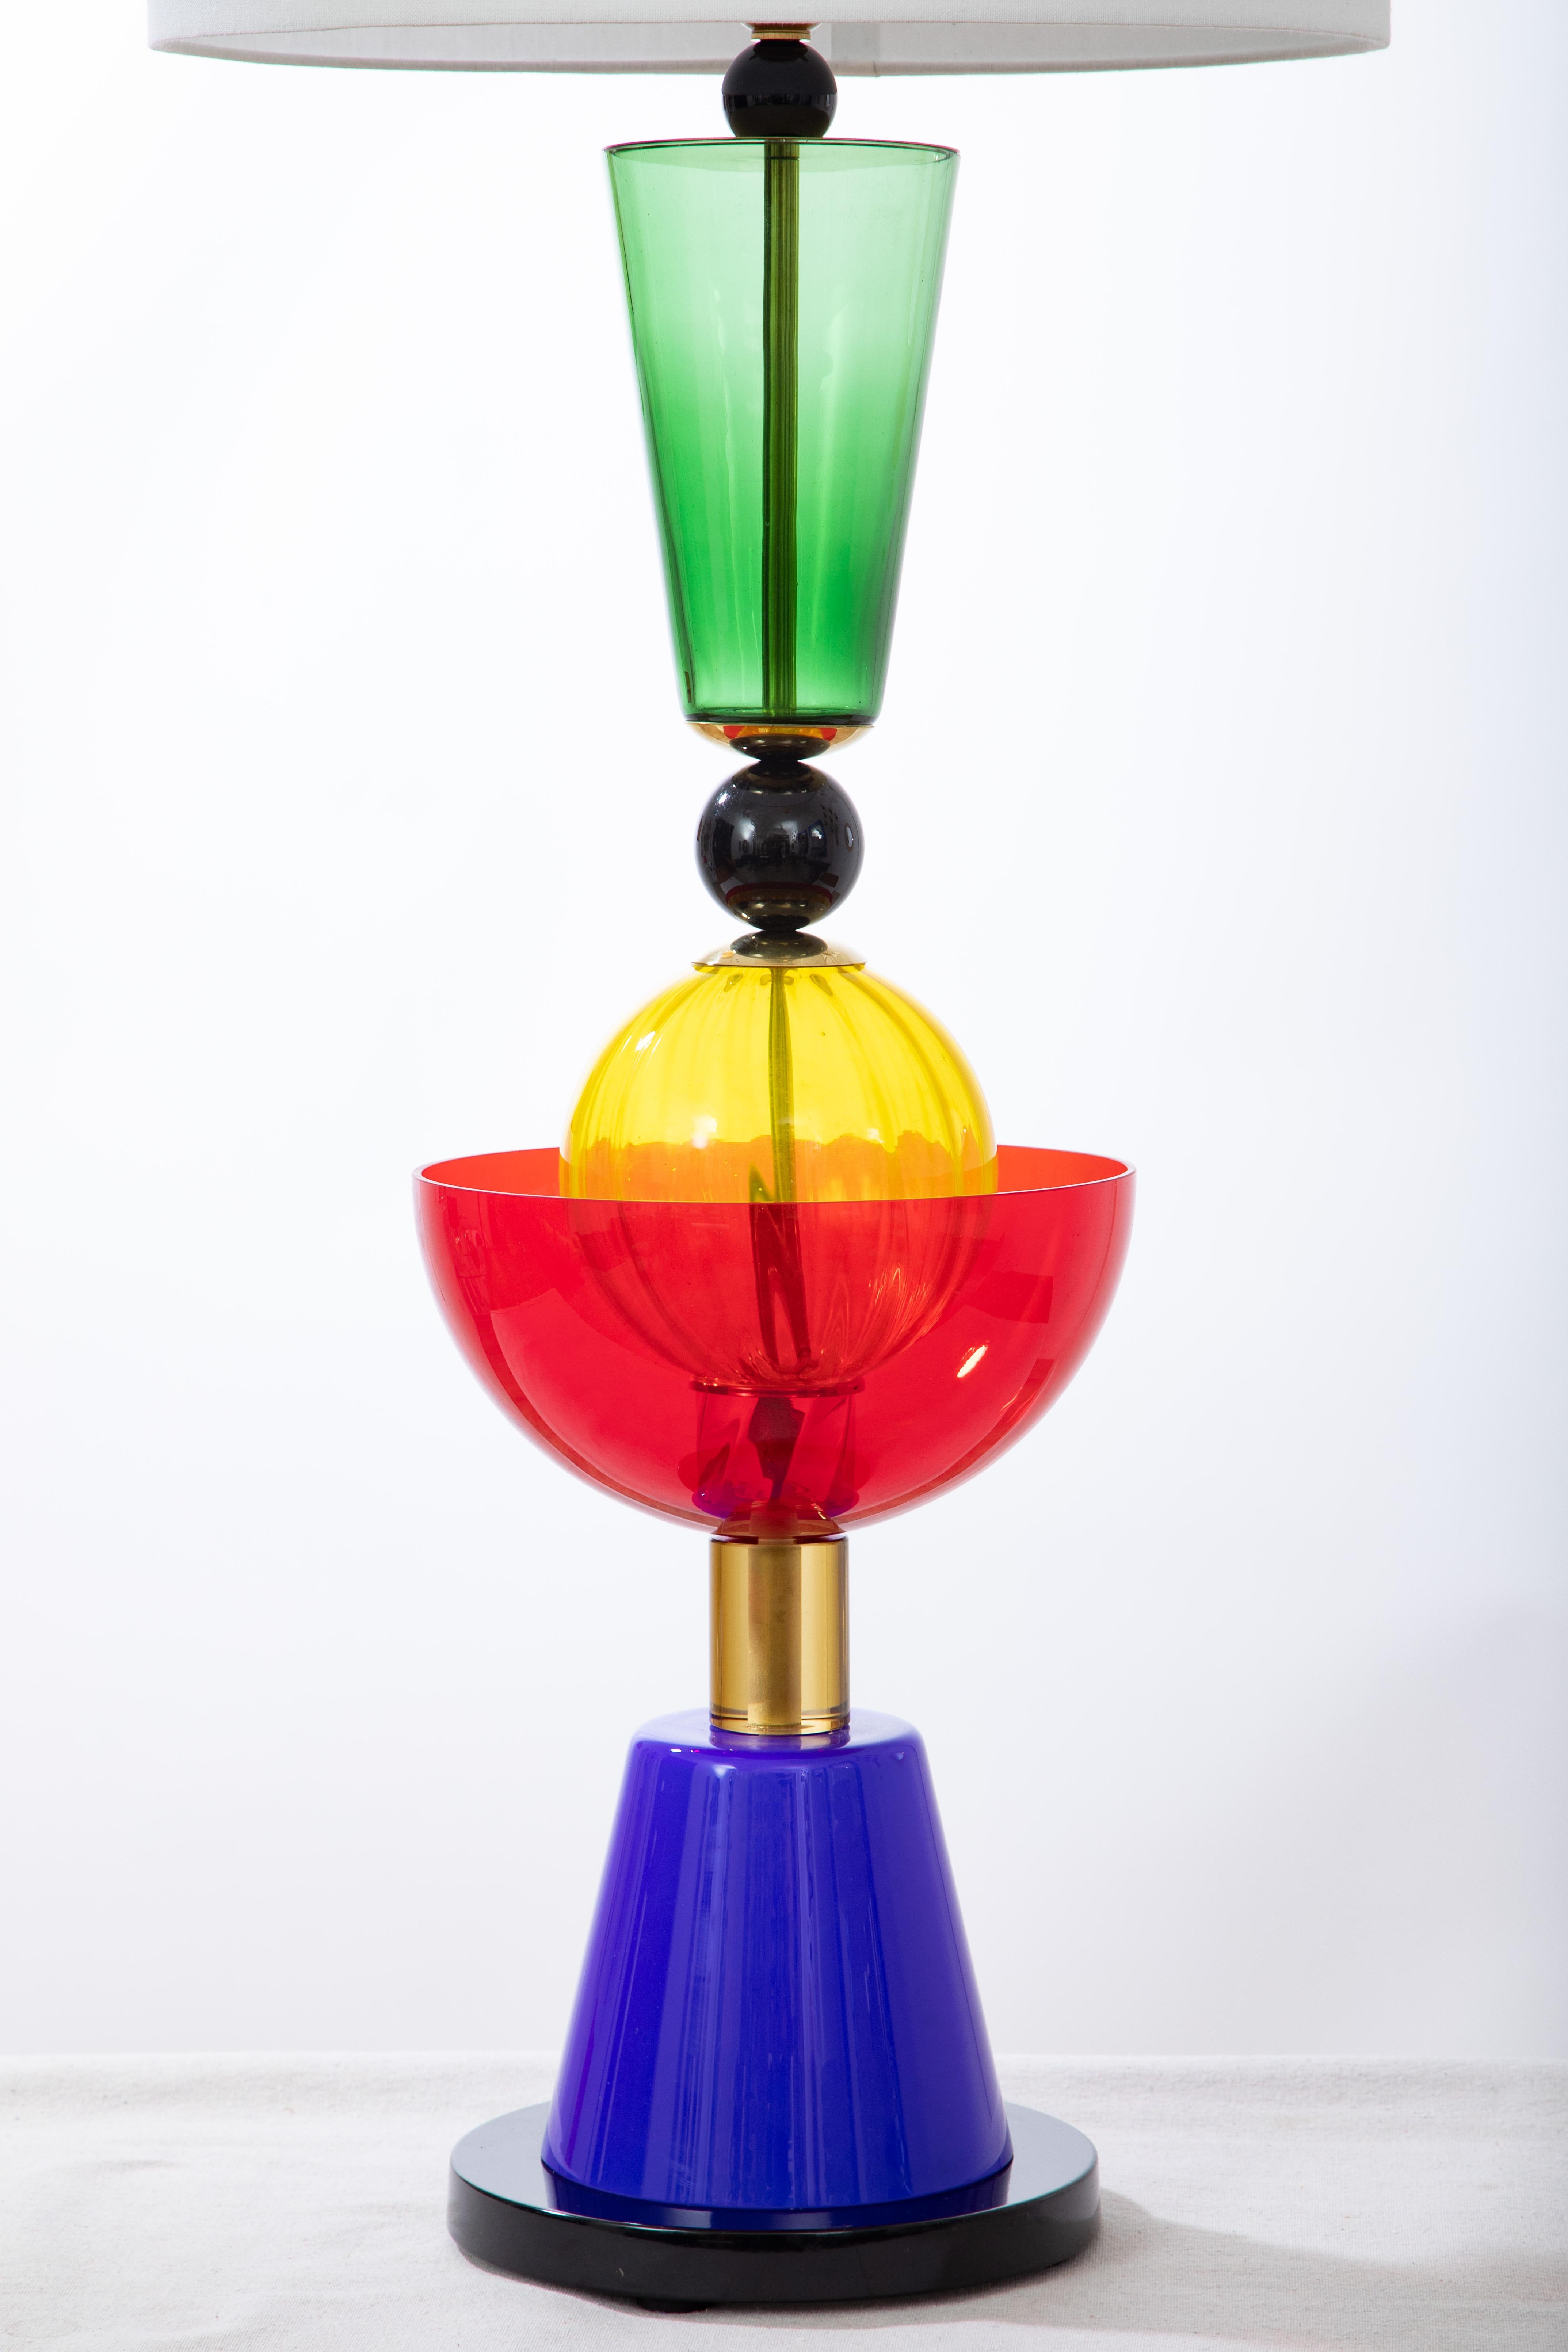 Studio glass Memphis style table lamp, Italy in stock.
One of a kind colorful table lamp.
Wired to the American standard.
31.5